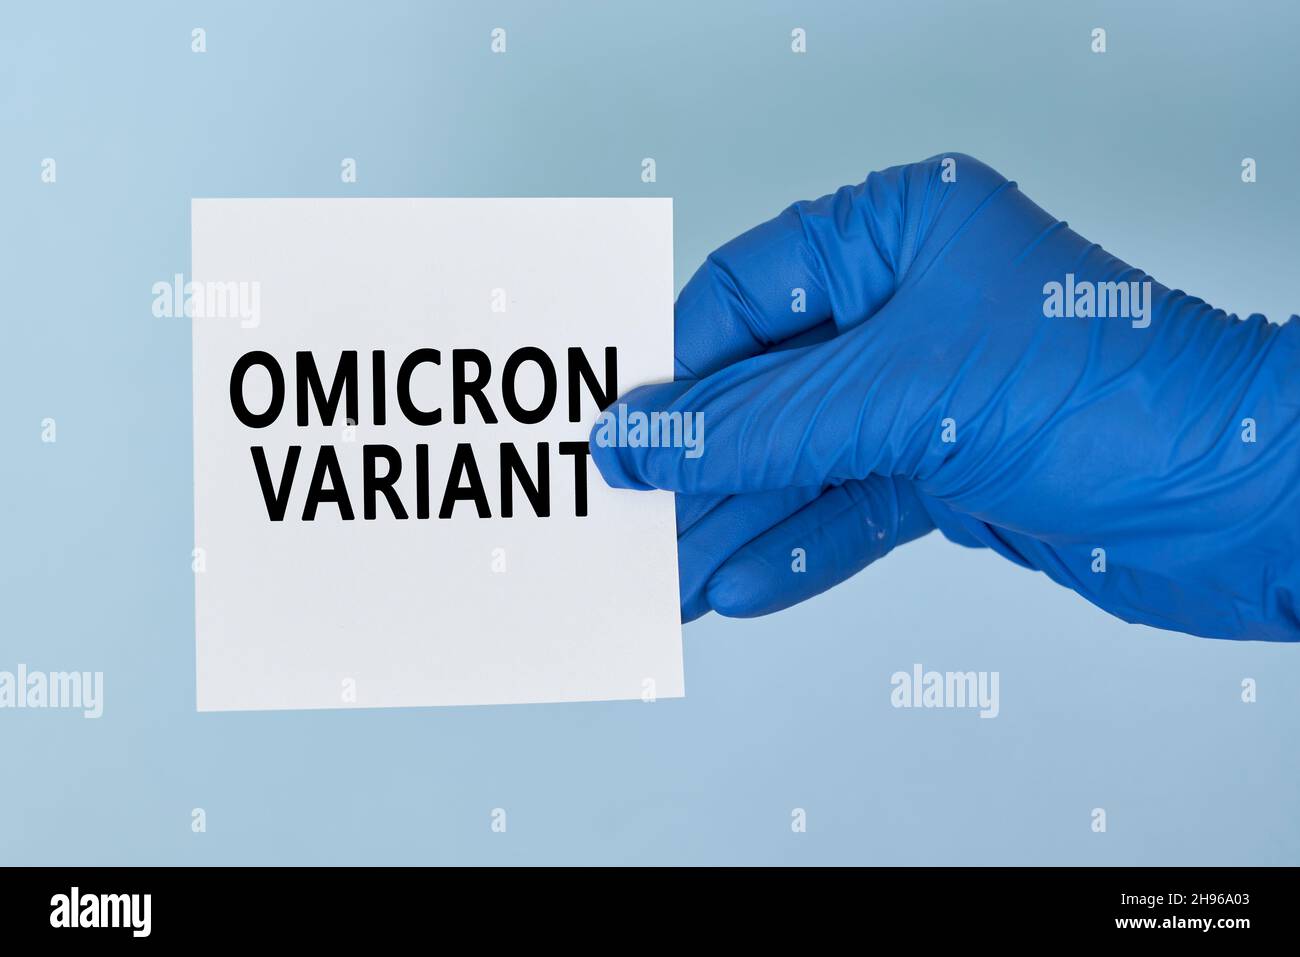 Doctor hand holds a card with text - New covid variant Omicron. Covid-19 new variant - Omicron. Omicron variant of coronavirus. SARS-CoV-2 variant of Stock Photo